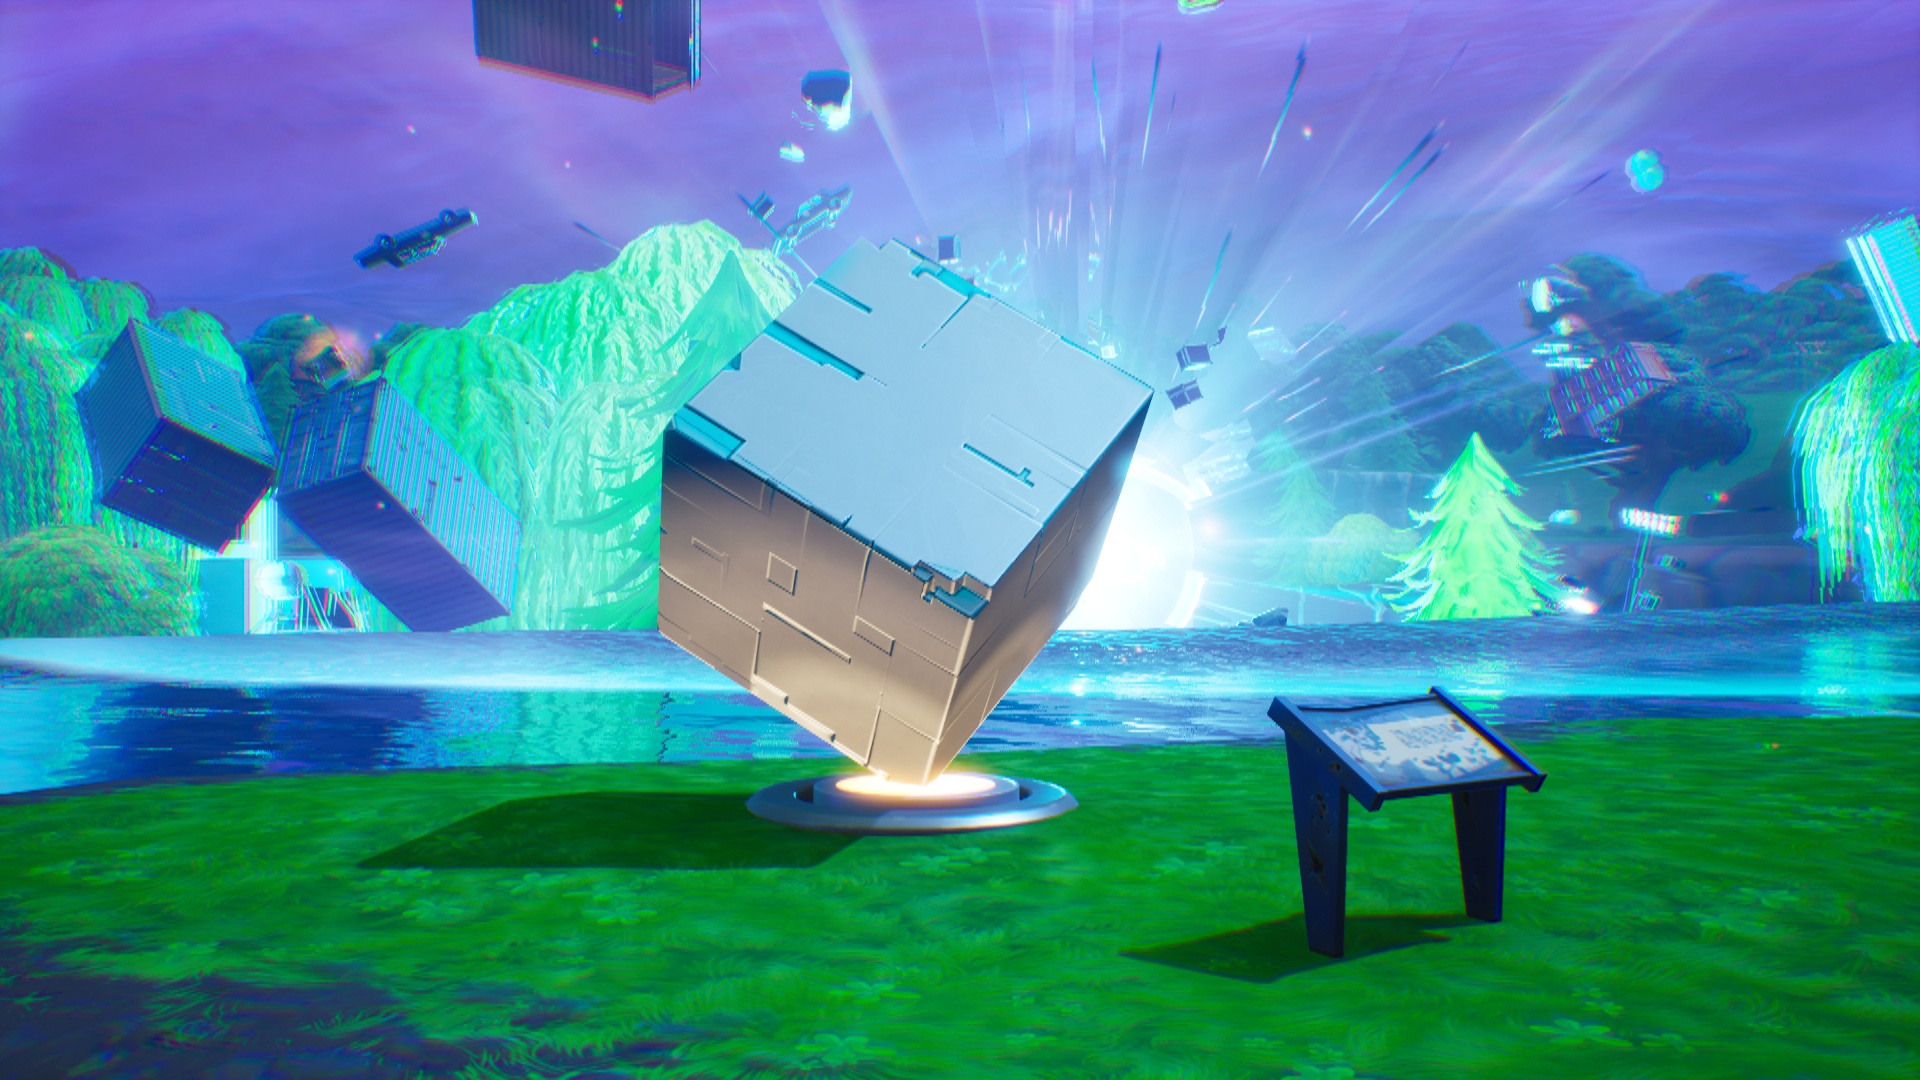 Take a trip down memory lane and pay tribute to Kevin the Cube by visiting ...